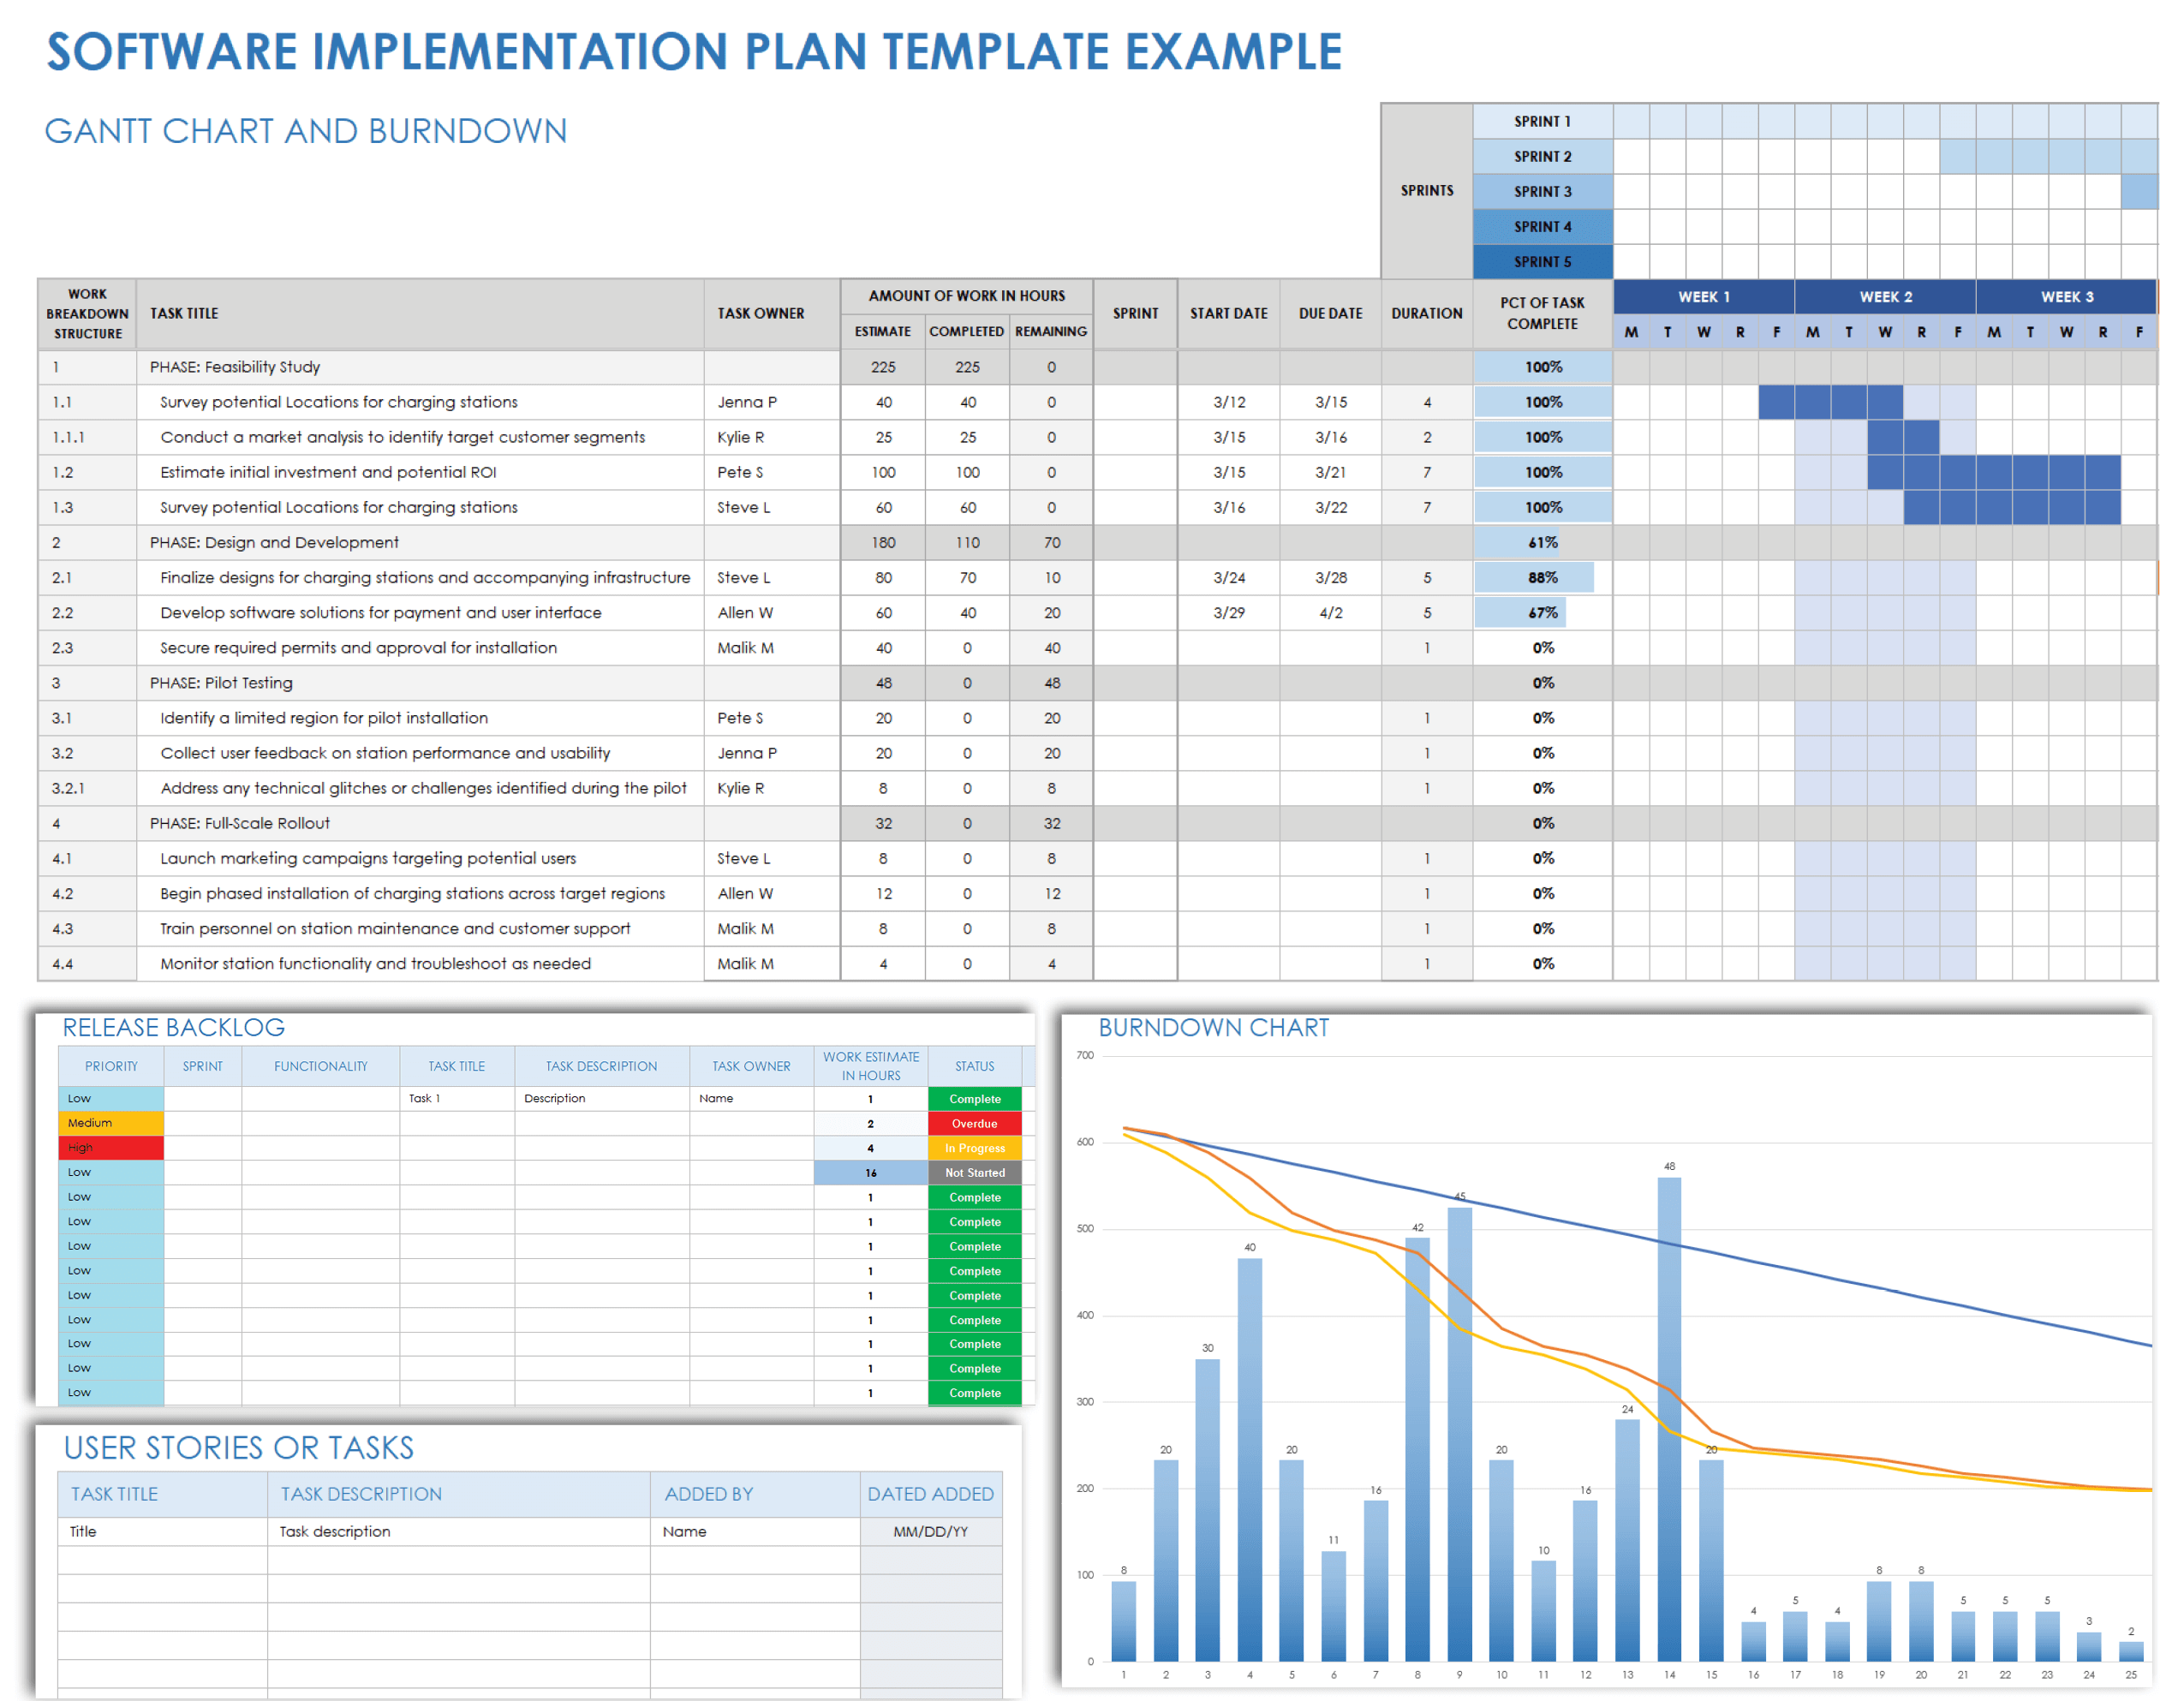 Software Implementation Plan Example Template